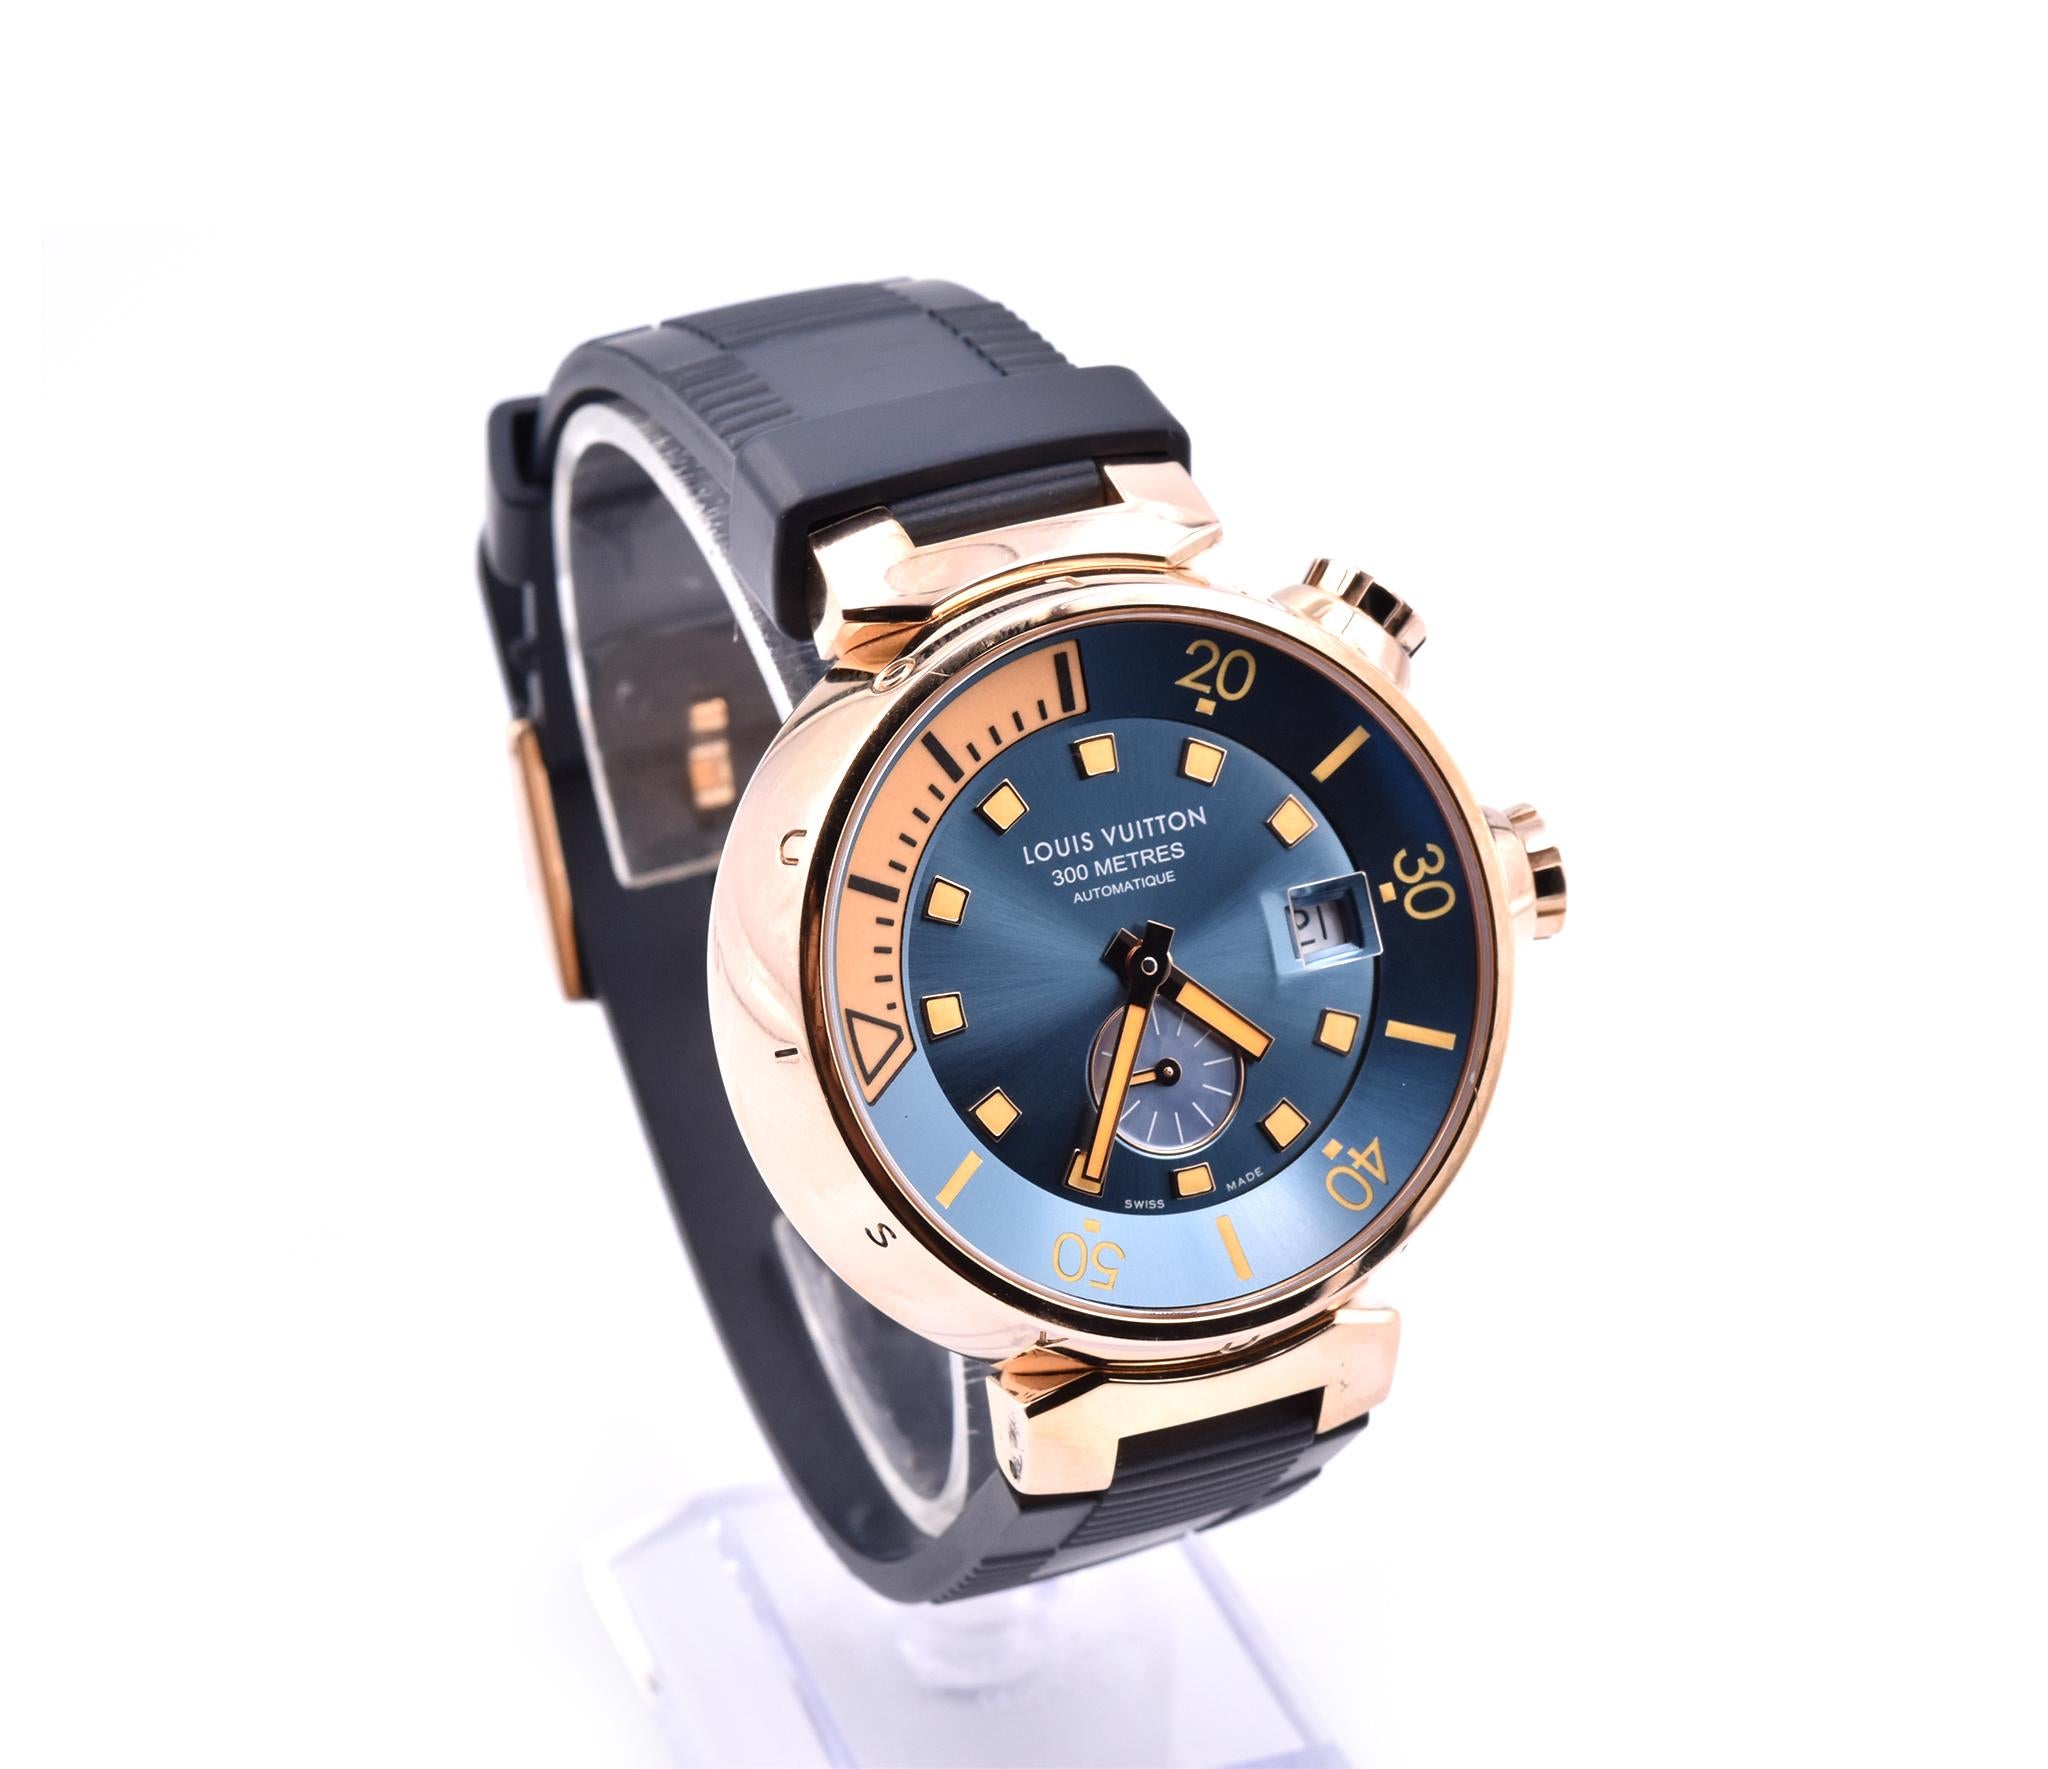 Movement: automatic
Function: hours, minutes, date, small seconds
Case: 44mm 18k rose gold case, screw down crown, 300m water resistance, rotating bezel 
Dial: blue steel dial with gold tone hour markers
Band: blue rubber strap with tang